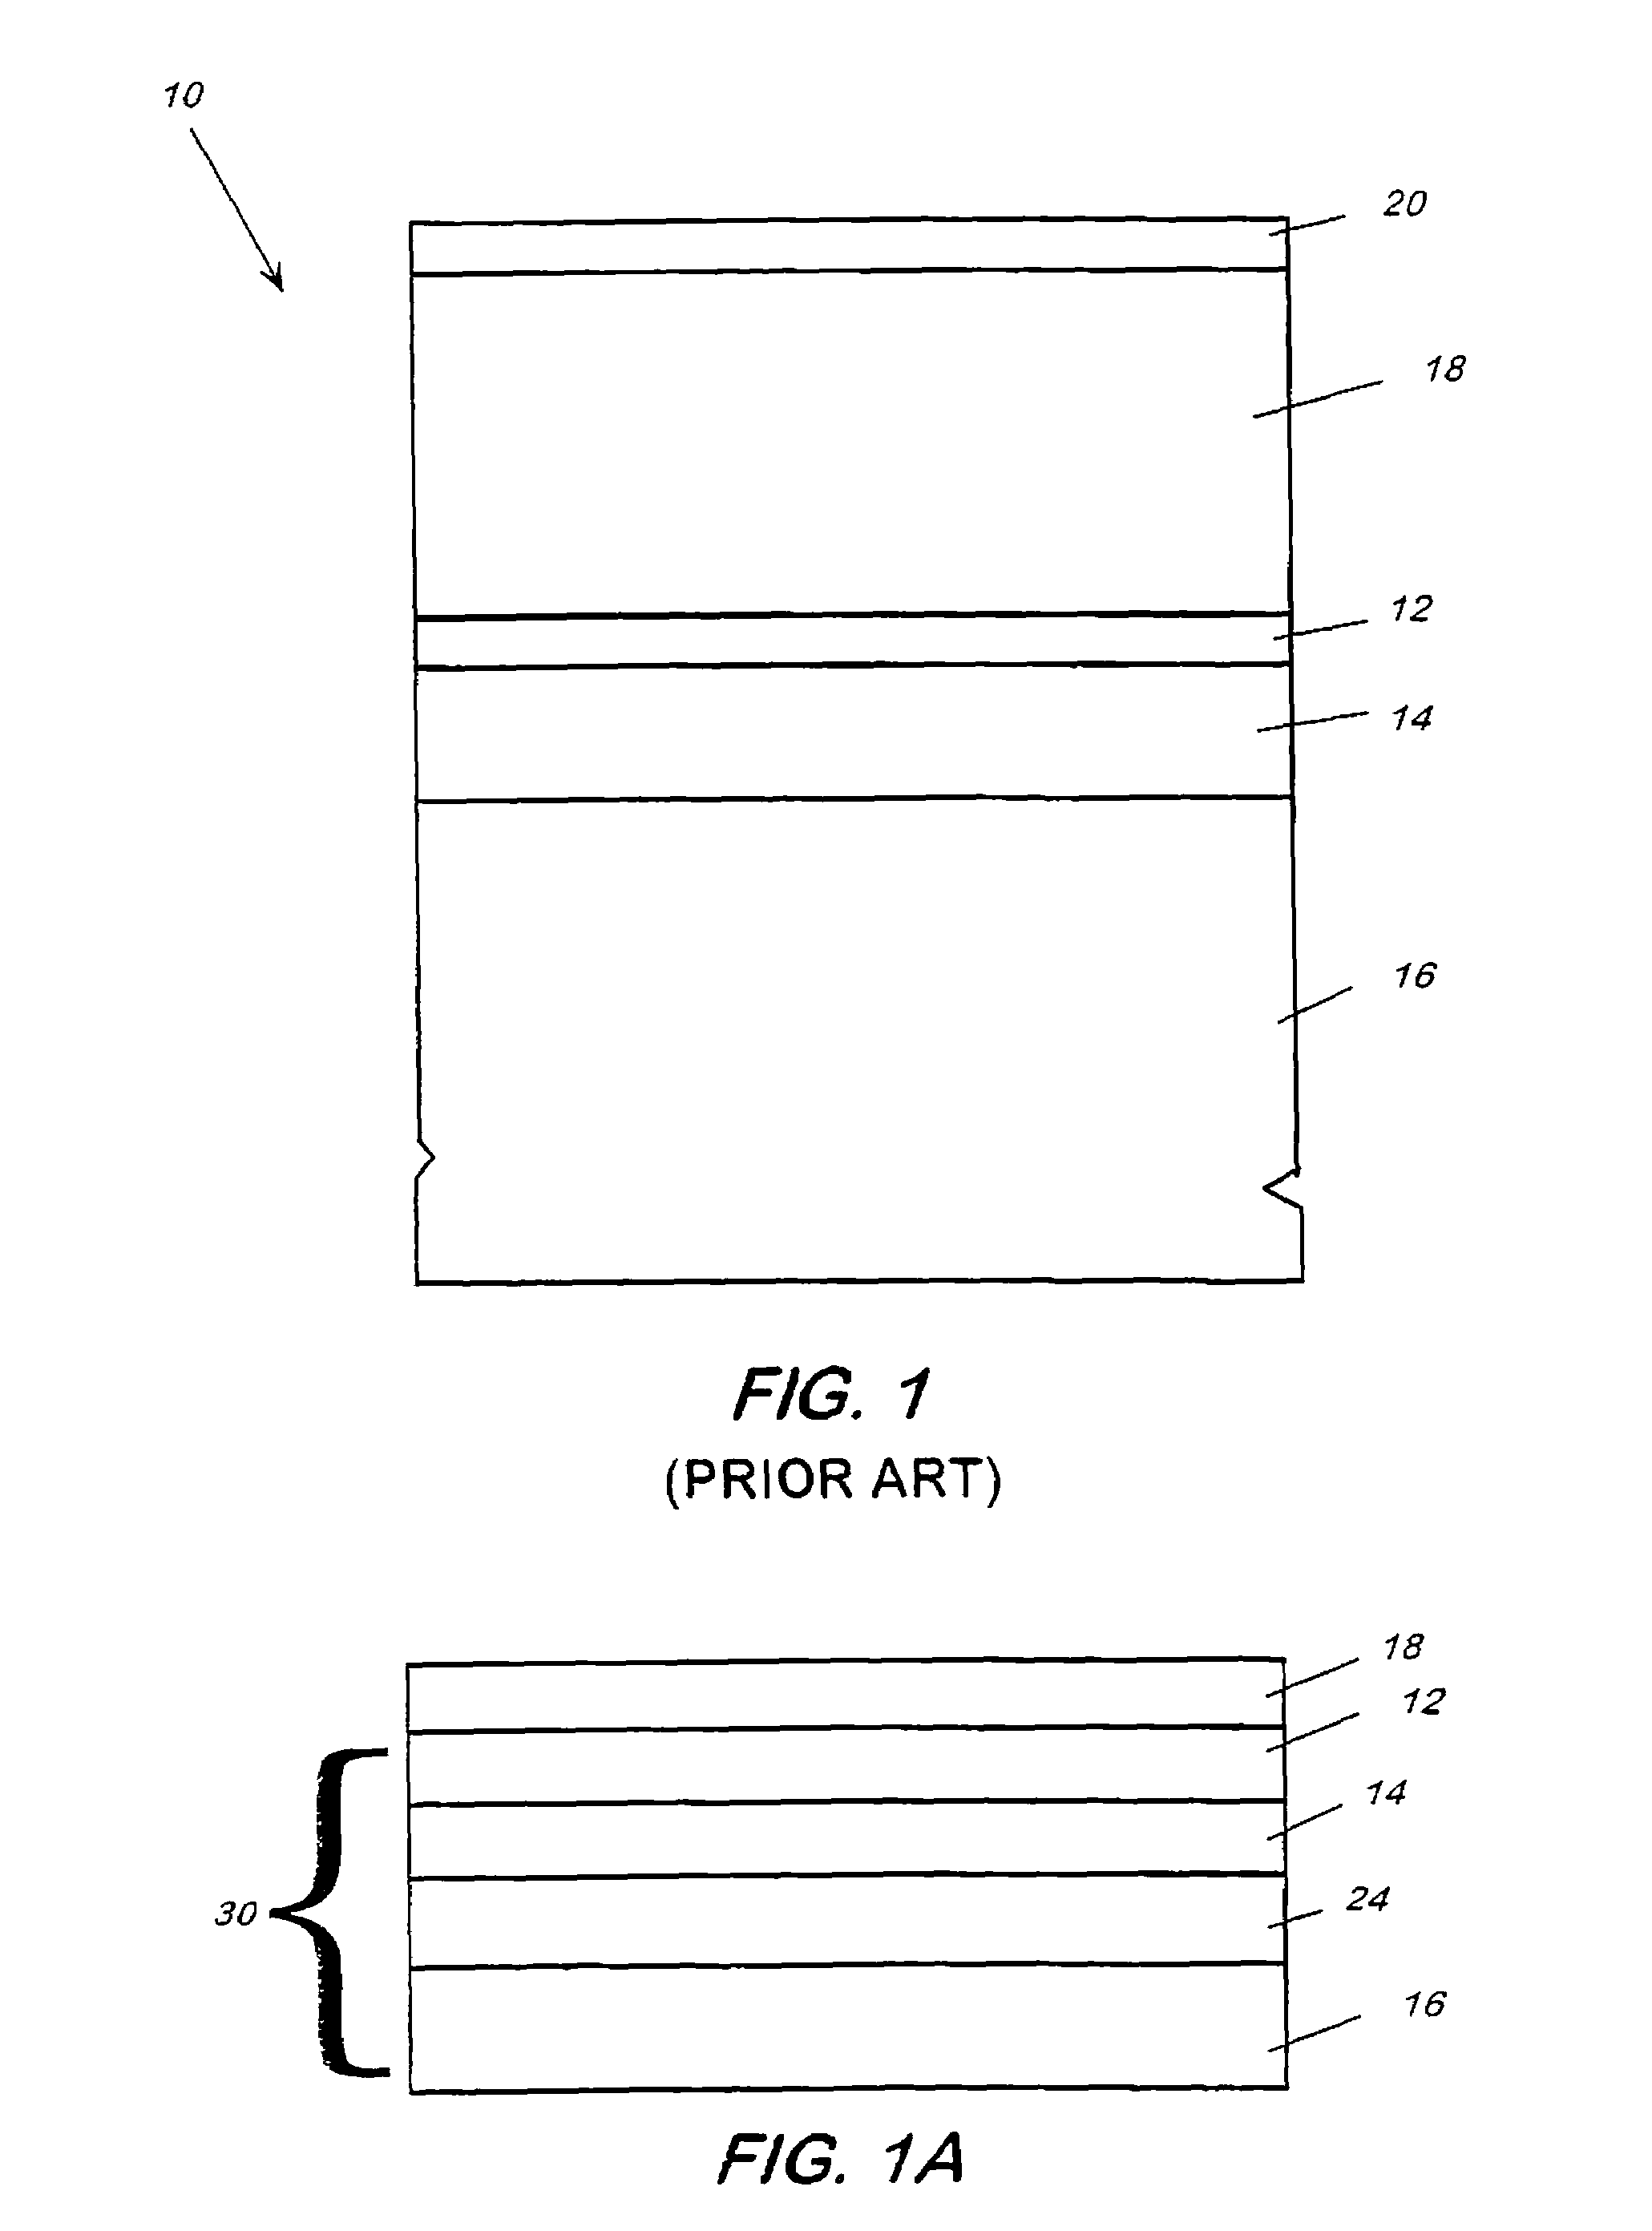 Neutron detection device and method of manufacture